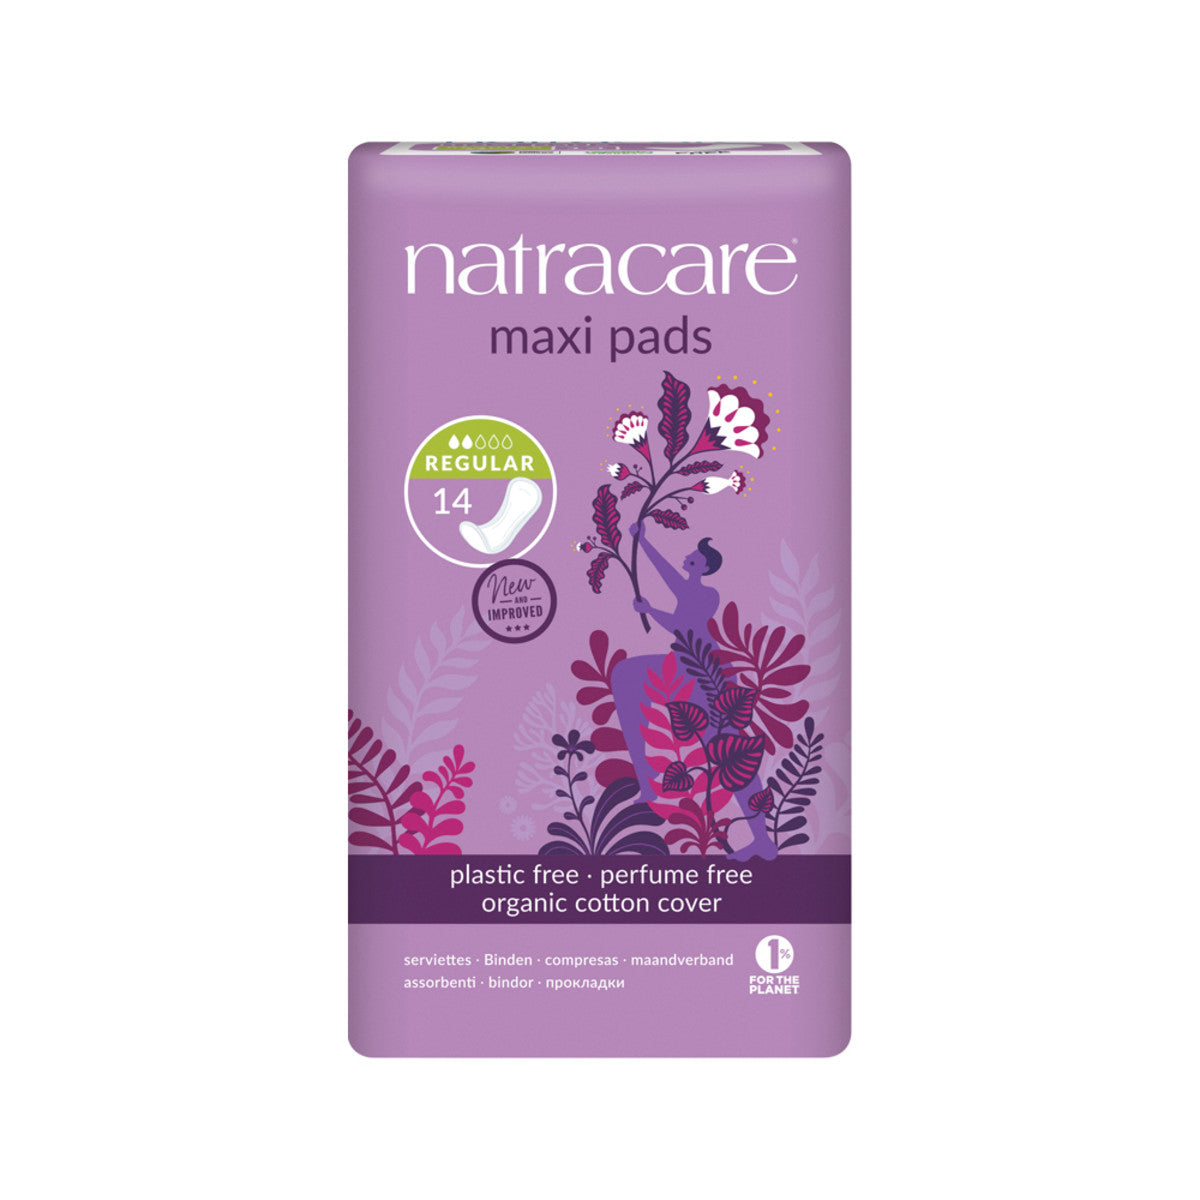 Natracare - Maxi Pads Regular with Organic Cotton Cover